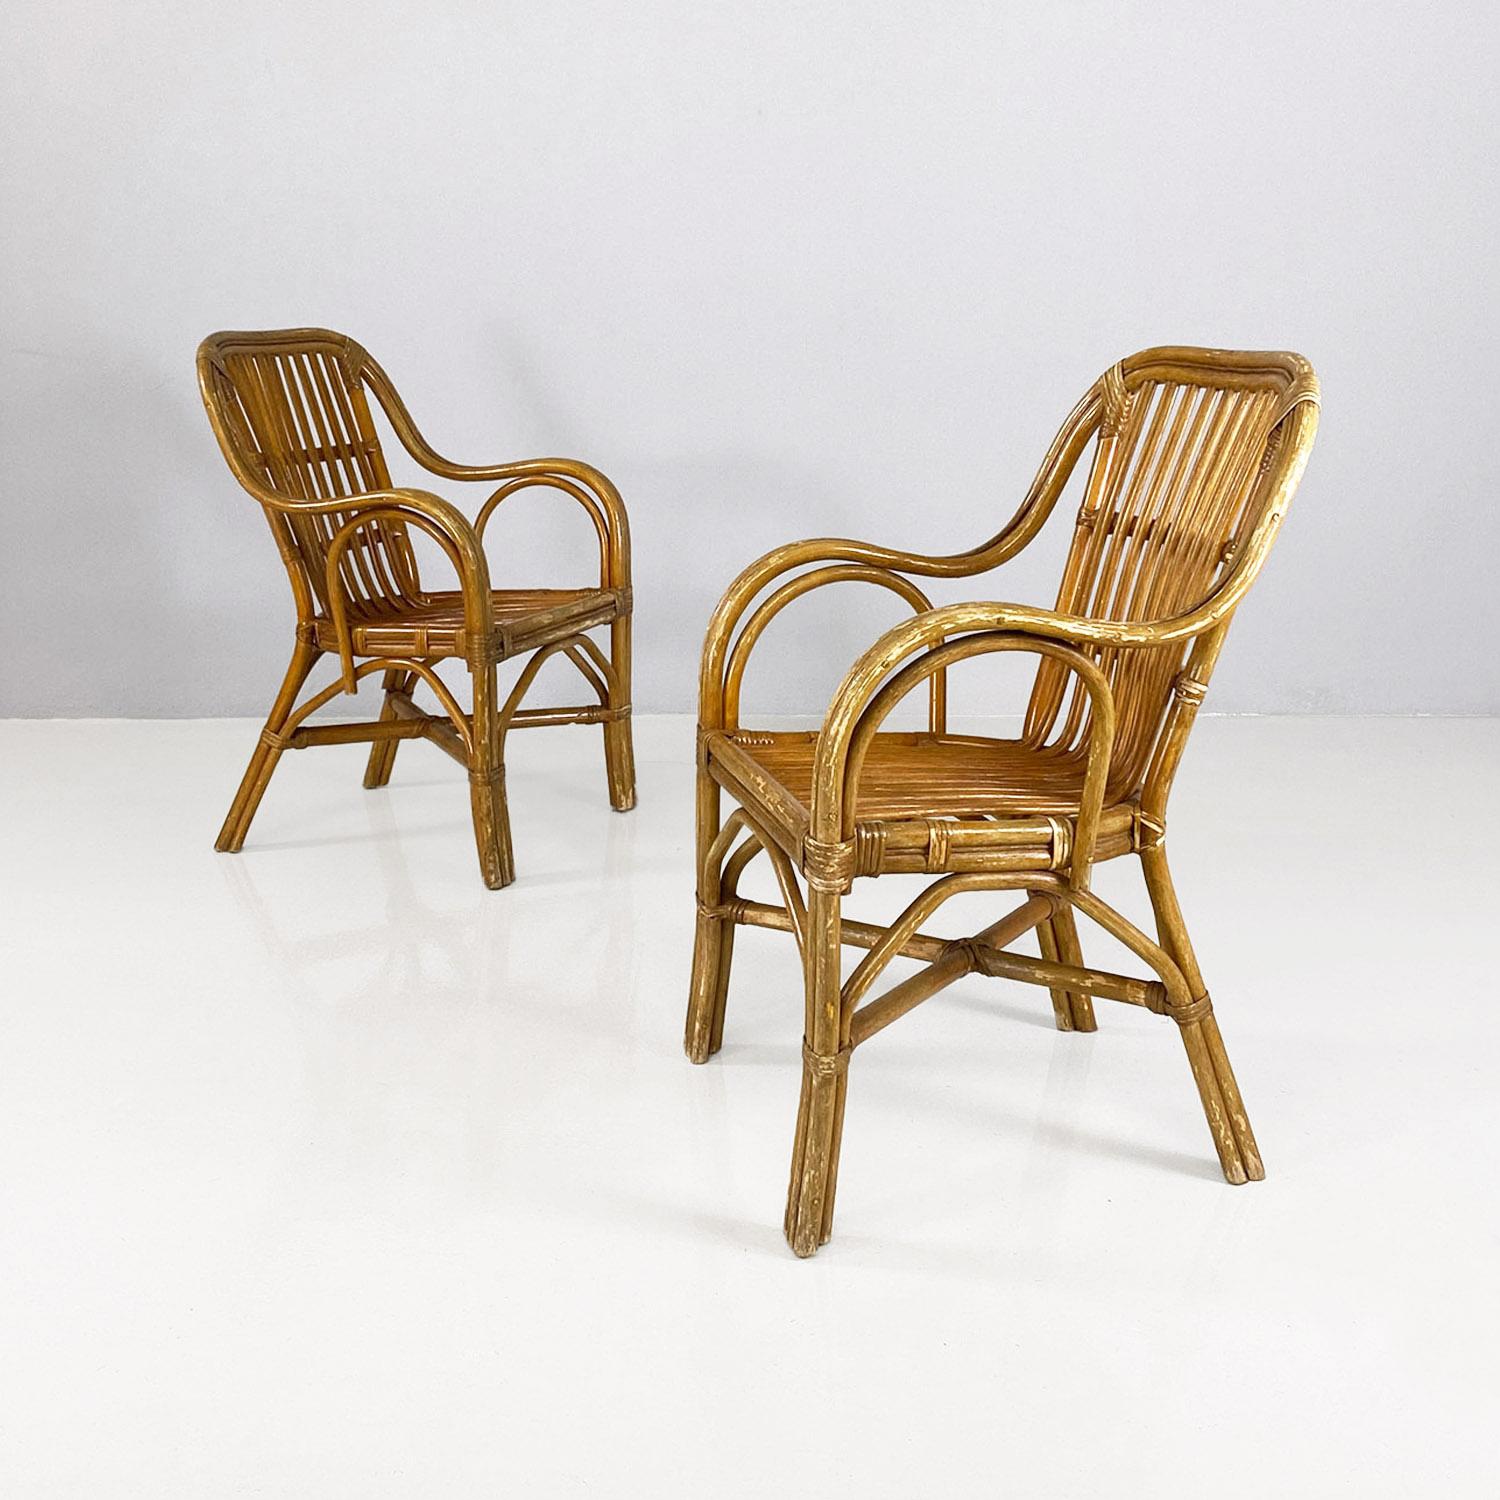 Italian mid-century modern rattan armchairs with curved armrests, 1960s For Sale 3